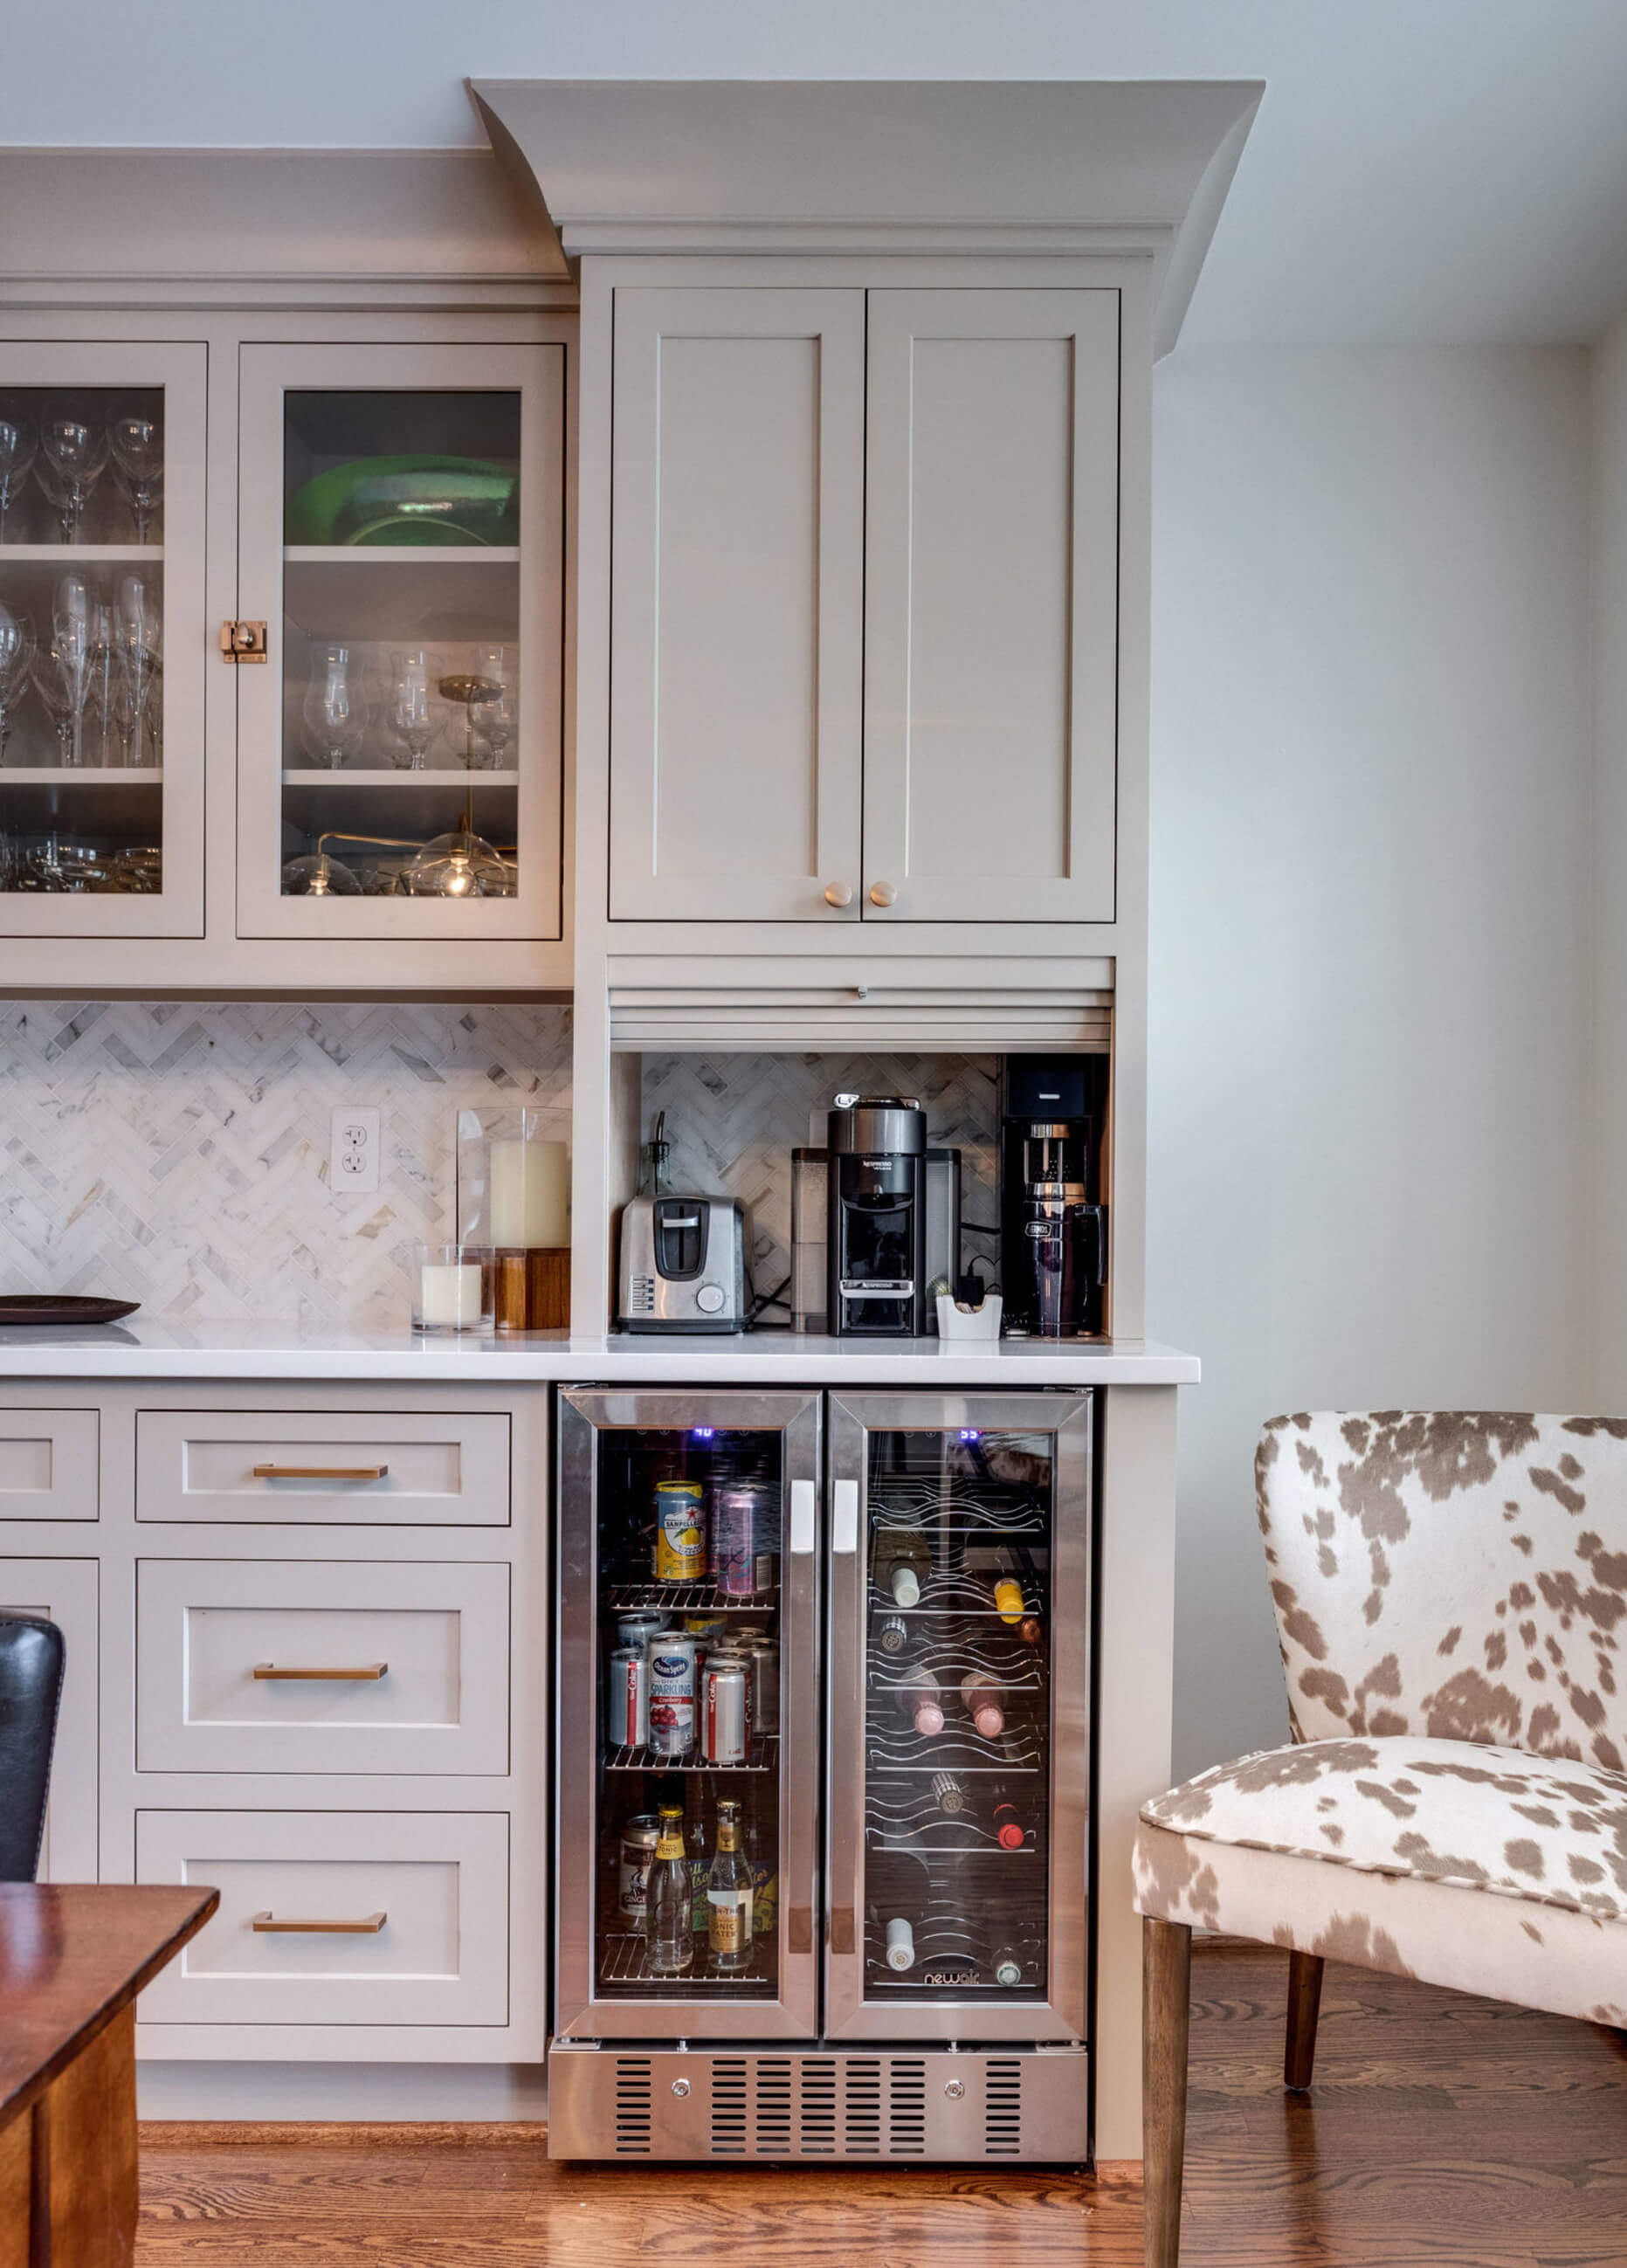 A mini-beverage center near an under-the-counter beverage fridge desgined as a hub for crafting beverages and making quick breakfast items on the go.